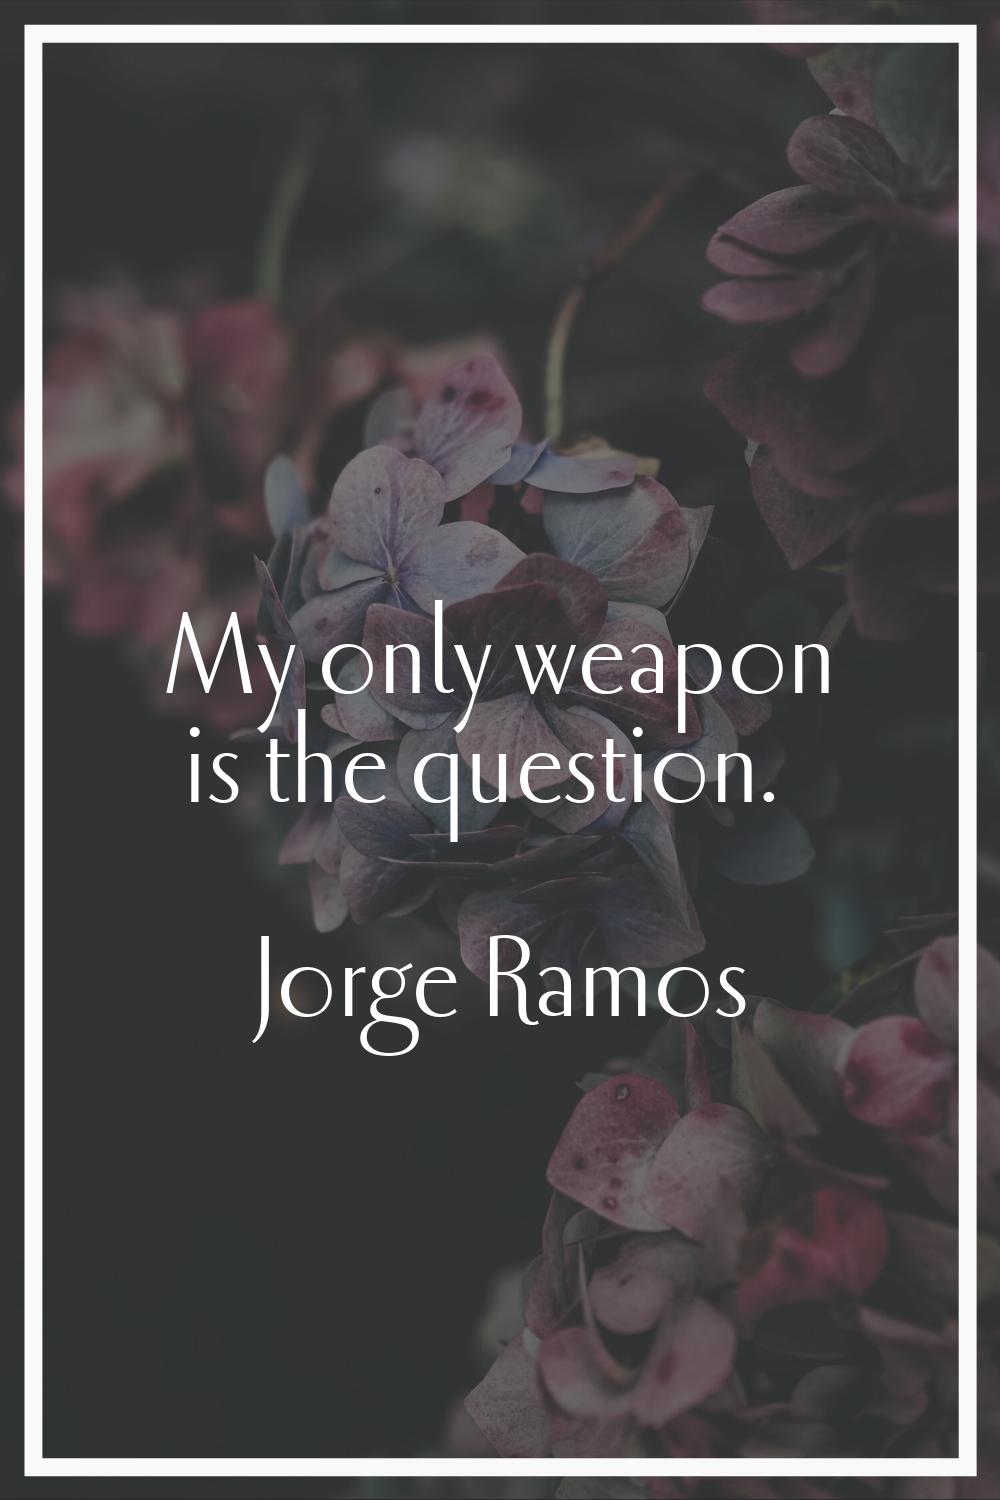 My only weapon is the question.